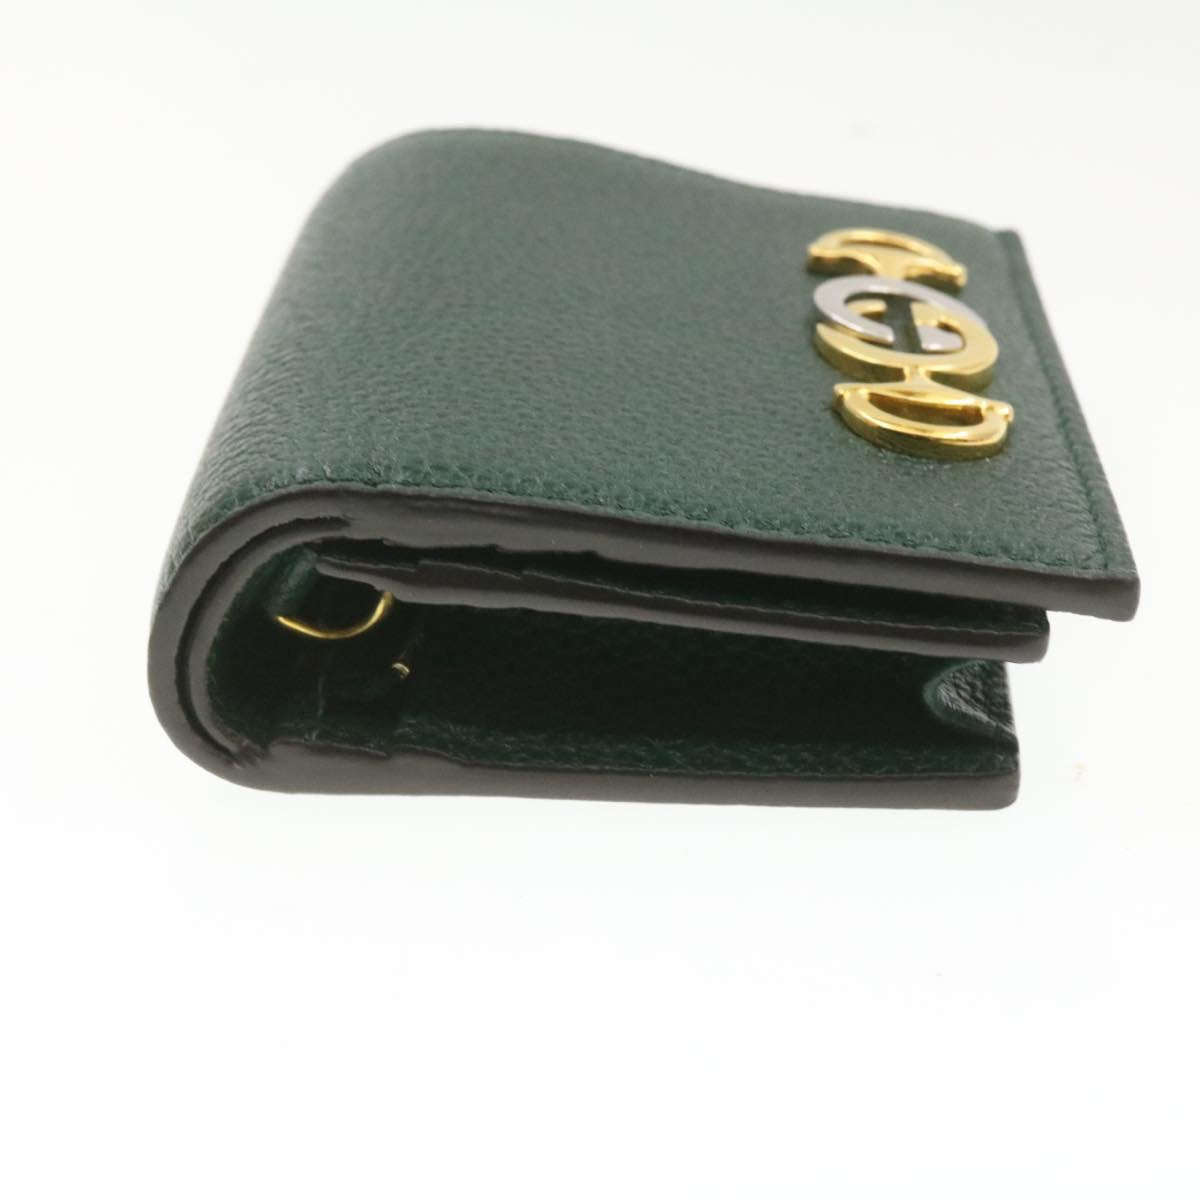 GUCCI Zumi Long Wallet Leather Green Auth am272b